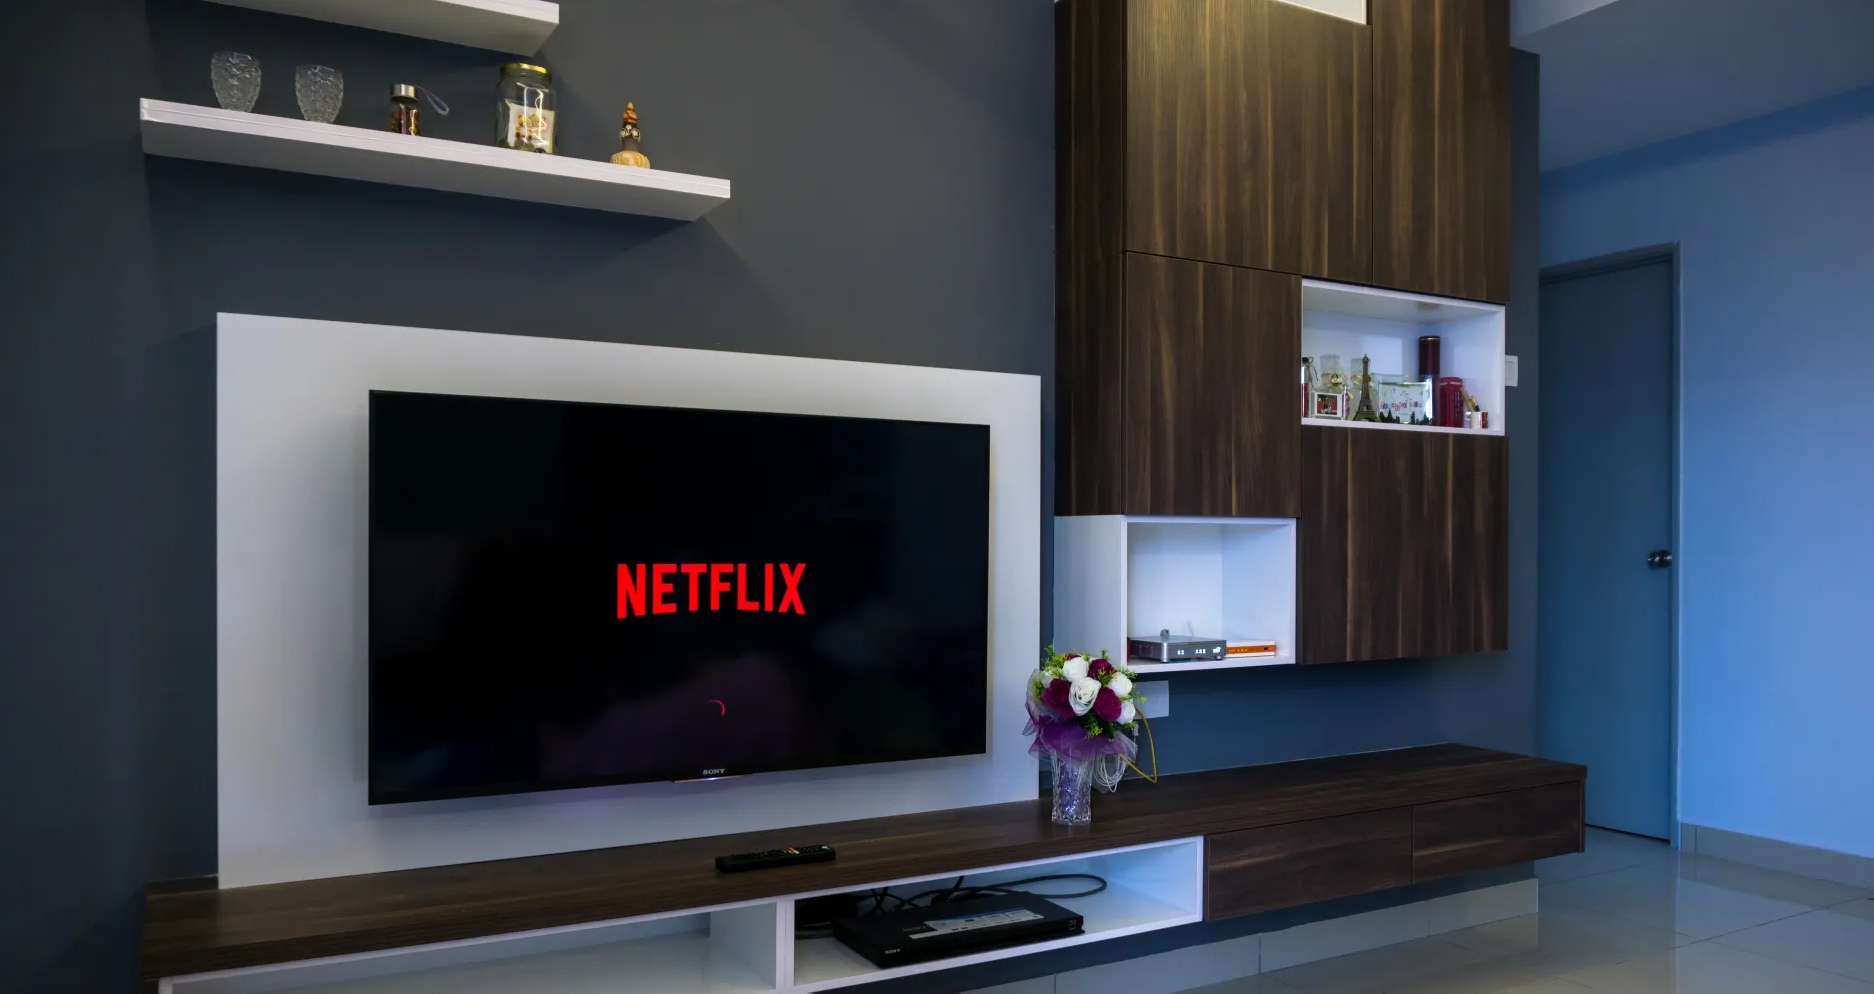 If you have a Netflix account in 4K it is very likely that you are missing out find out why